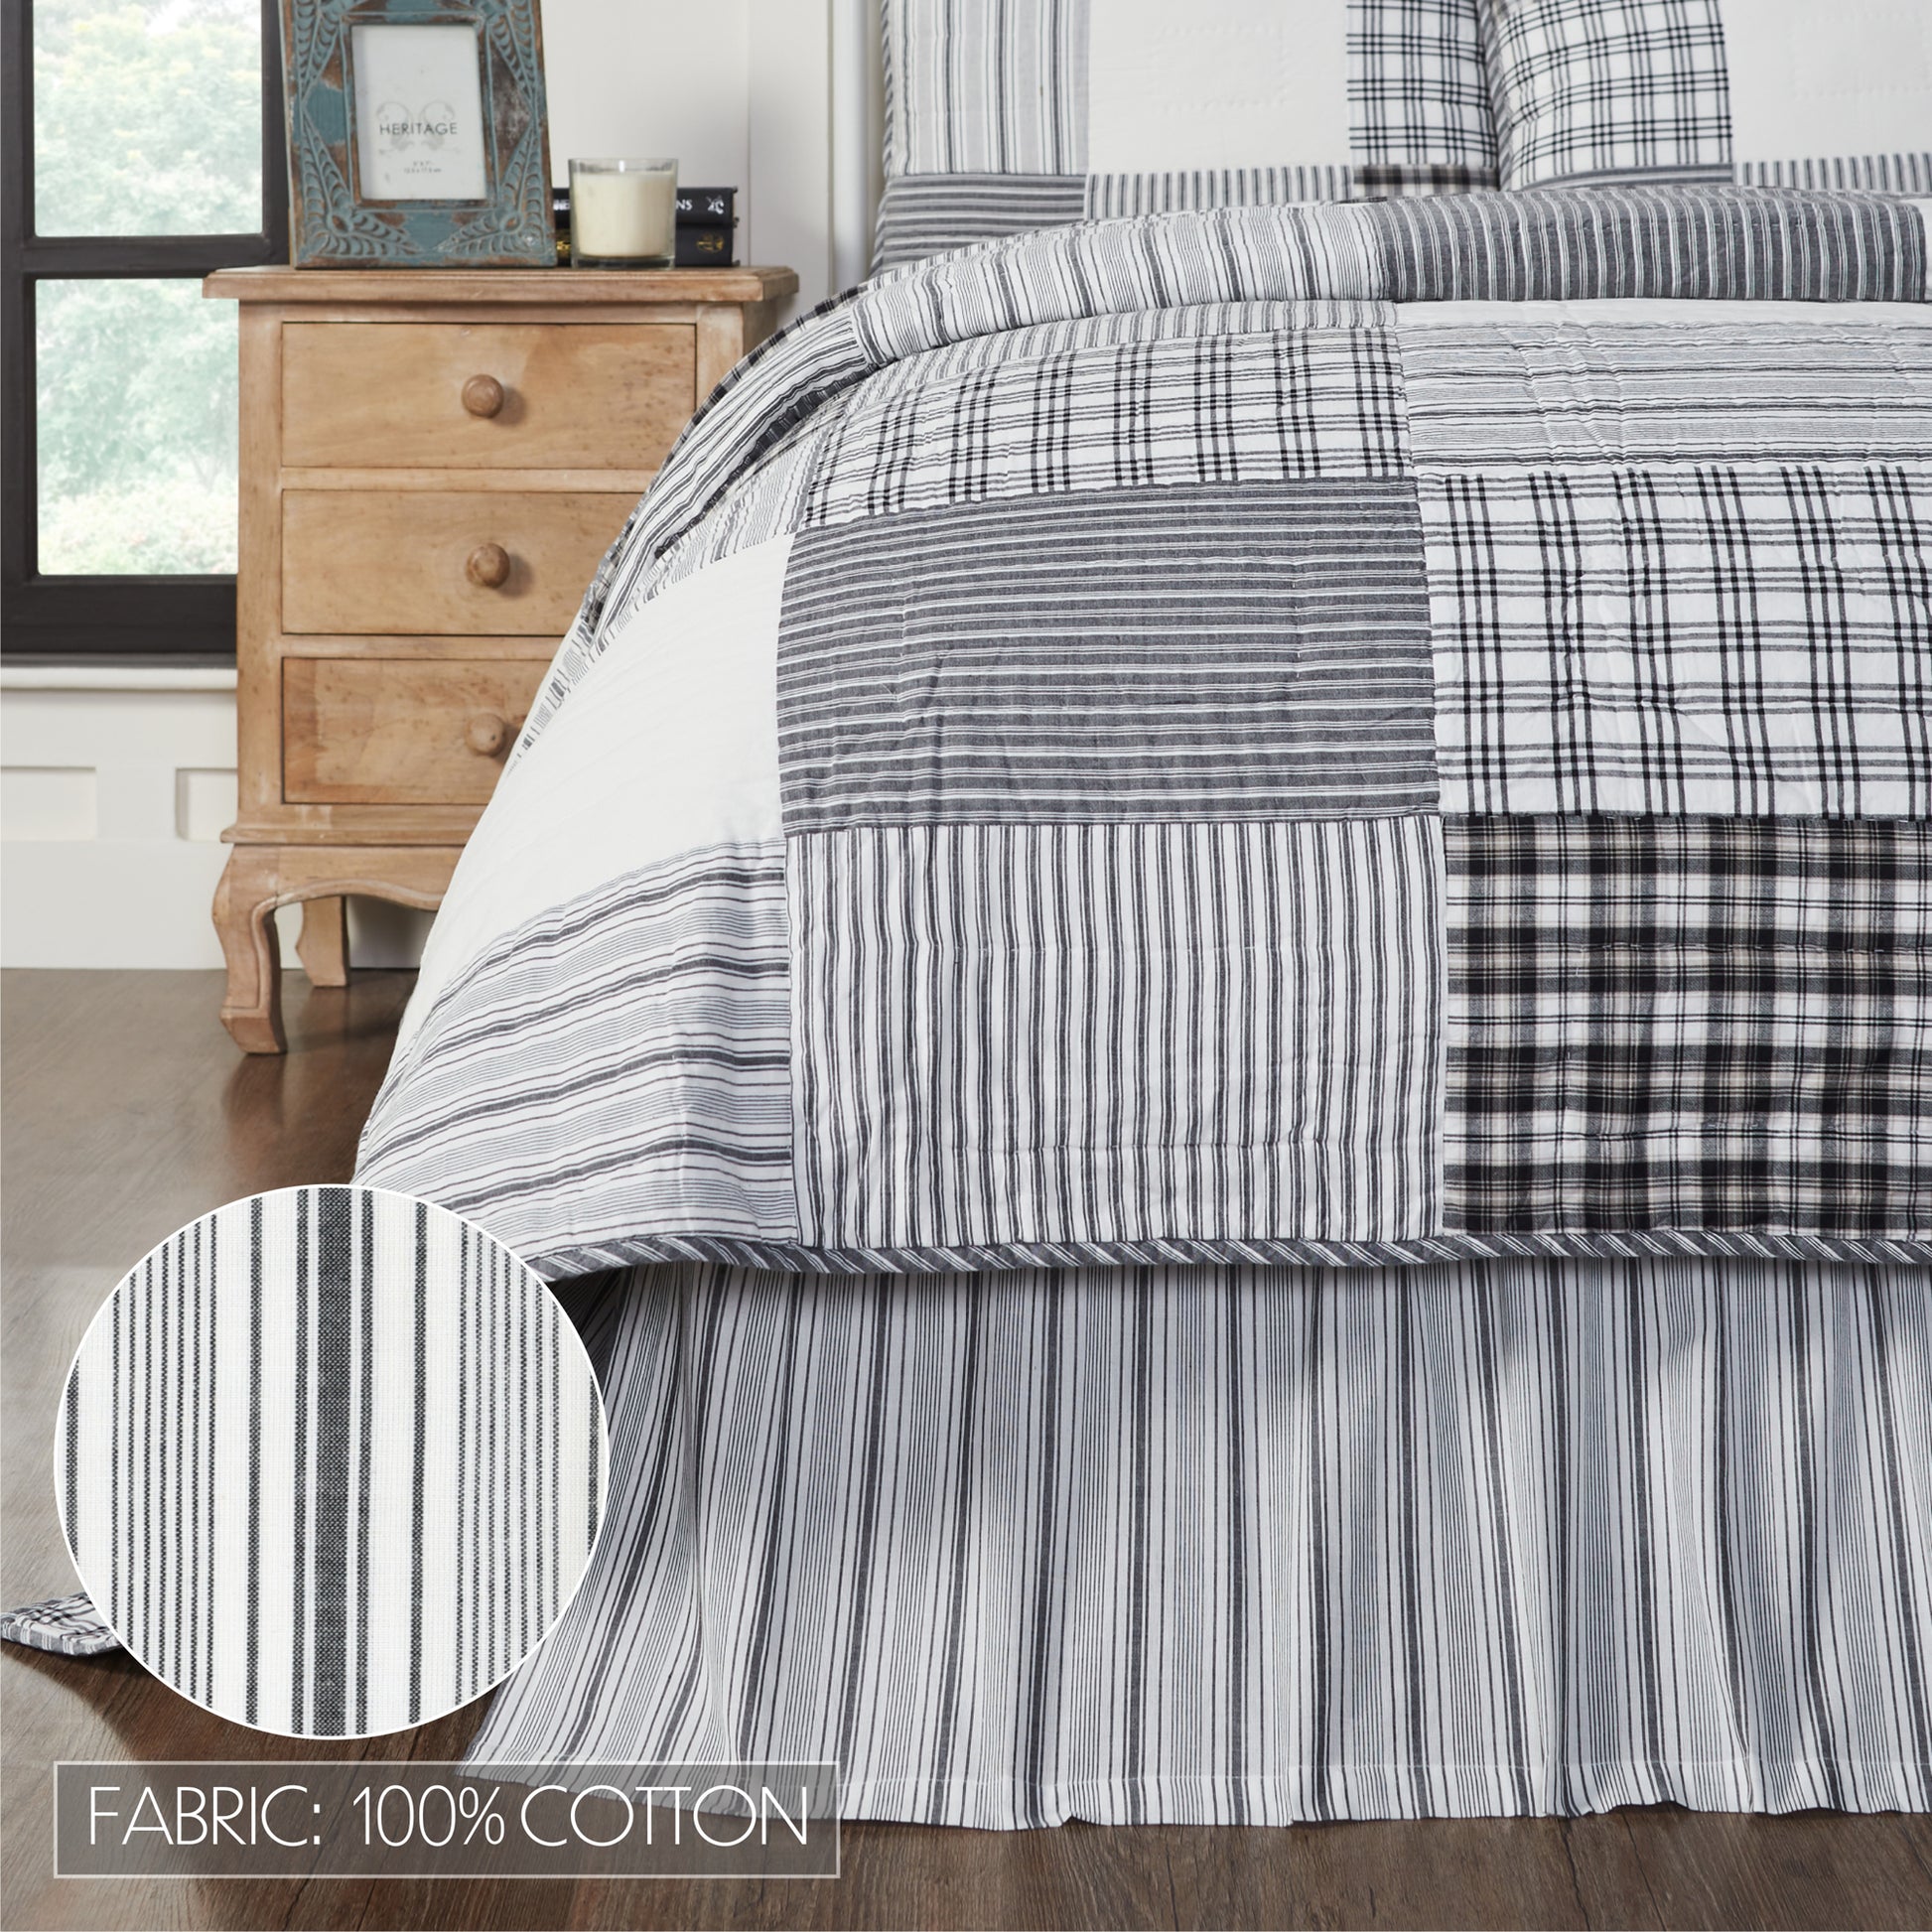 80439-Sawyer-Mill-Black-Queen-Bed-Skirt-60x80x16-image-4